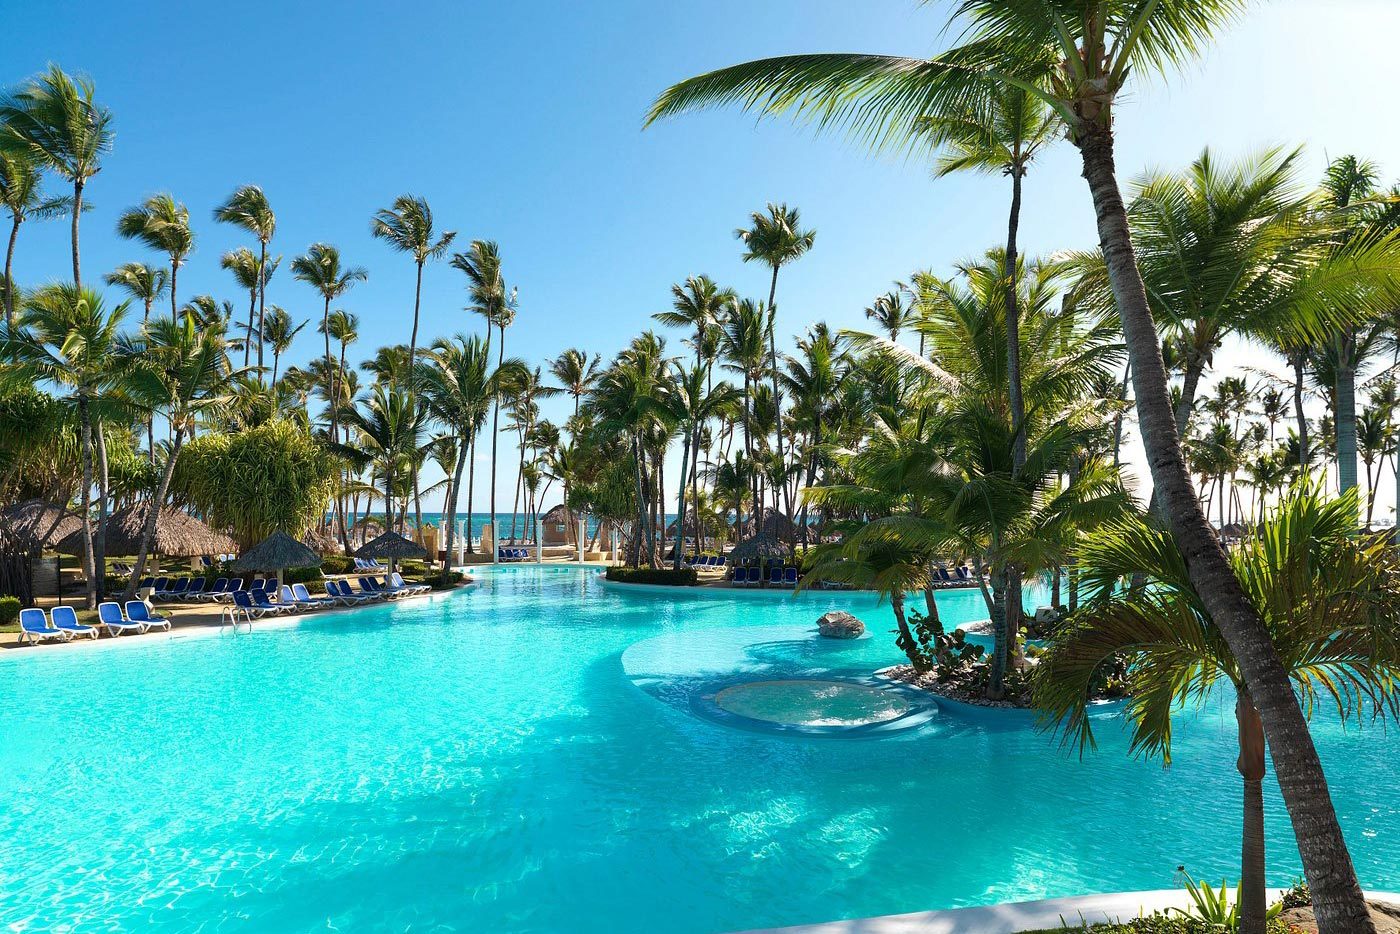 <h3>Meliá Caribe Beach Resort, Dominican Republic</h3> <p>For those who find "free golf" the best value for their green, it's hard to overlook the <a href="https://www.tripadvisor.com/Hotel_Review-g3176298-d14815741-Reviews-Melia_Caribe_Beach_Resort-Bavaro_Punta_Cana_La_Altagracia_Province_Dominican_Republi.html" rel="noopener noreferrer">Melia Caribe Beach Resort</a>, one of the best affordable all-inclusive resorts in Punta Cana, which offers complimentary rounds with some stays—especially when it's designed by six-time Spanish champ Jose "Pepe" Gancedo. The three nine-hole courses are interspersed with coconut trees and beautiful lakes.</p> <p>The resort's interiors are classically colonial with a timeless cream and dark wood scheme. All of these are steps from a prime location on Bavaro Beach—a short meander away, past 13 restaurants and through tropical gardens. There's also the Splash Island Water Park, where the kids can play in the water as you do the same on the green. For even more to do, this resort offers a complimentary shuttle to the theme park Katmandu Park and sells tickets to the attraction right on site.</p> <p><strong>Pros:</strong></p> <ul> <li>Golf is listed among the resort's inclusions for select stays</li> <li>Wide selection of restaurants</li> <li>Complimentary shuttle to Katmandu Park</li> </ul> <p><strong>Cons:</strong></p> <ul> <li>Golf cart rental not included</li> <li>Need to rent golf clubs at an additional cost or pack your own</li> </ul> <p class="listicle-page__cta-button-shop"><a class="shop-btn" href="https://www.tripadvisor.com/Hotel_Review-g3176298-d14815741-Reviews-Melia_Caribe_Beach_Resort-Bavaro_Punta_Cana_La_Altagracia_Province_Dominican_Republi.html">Book Now</a></p>